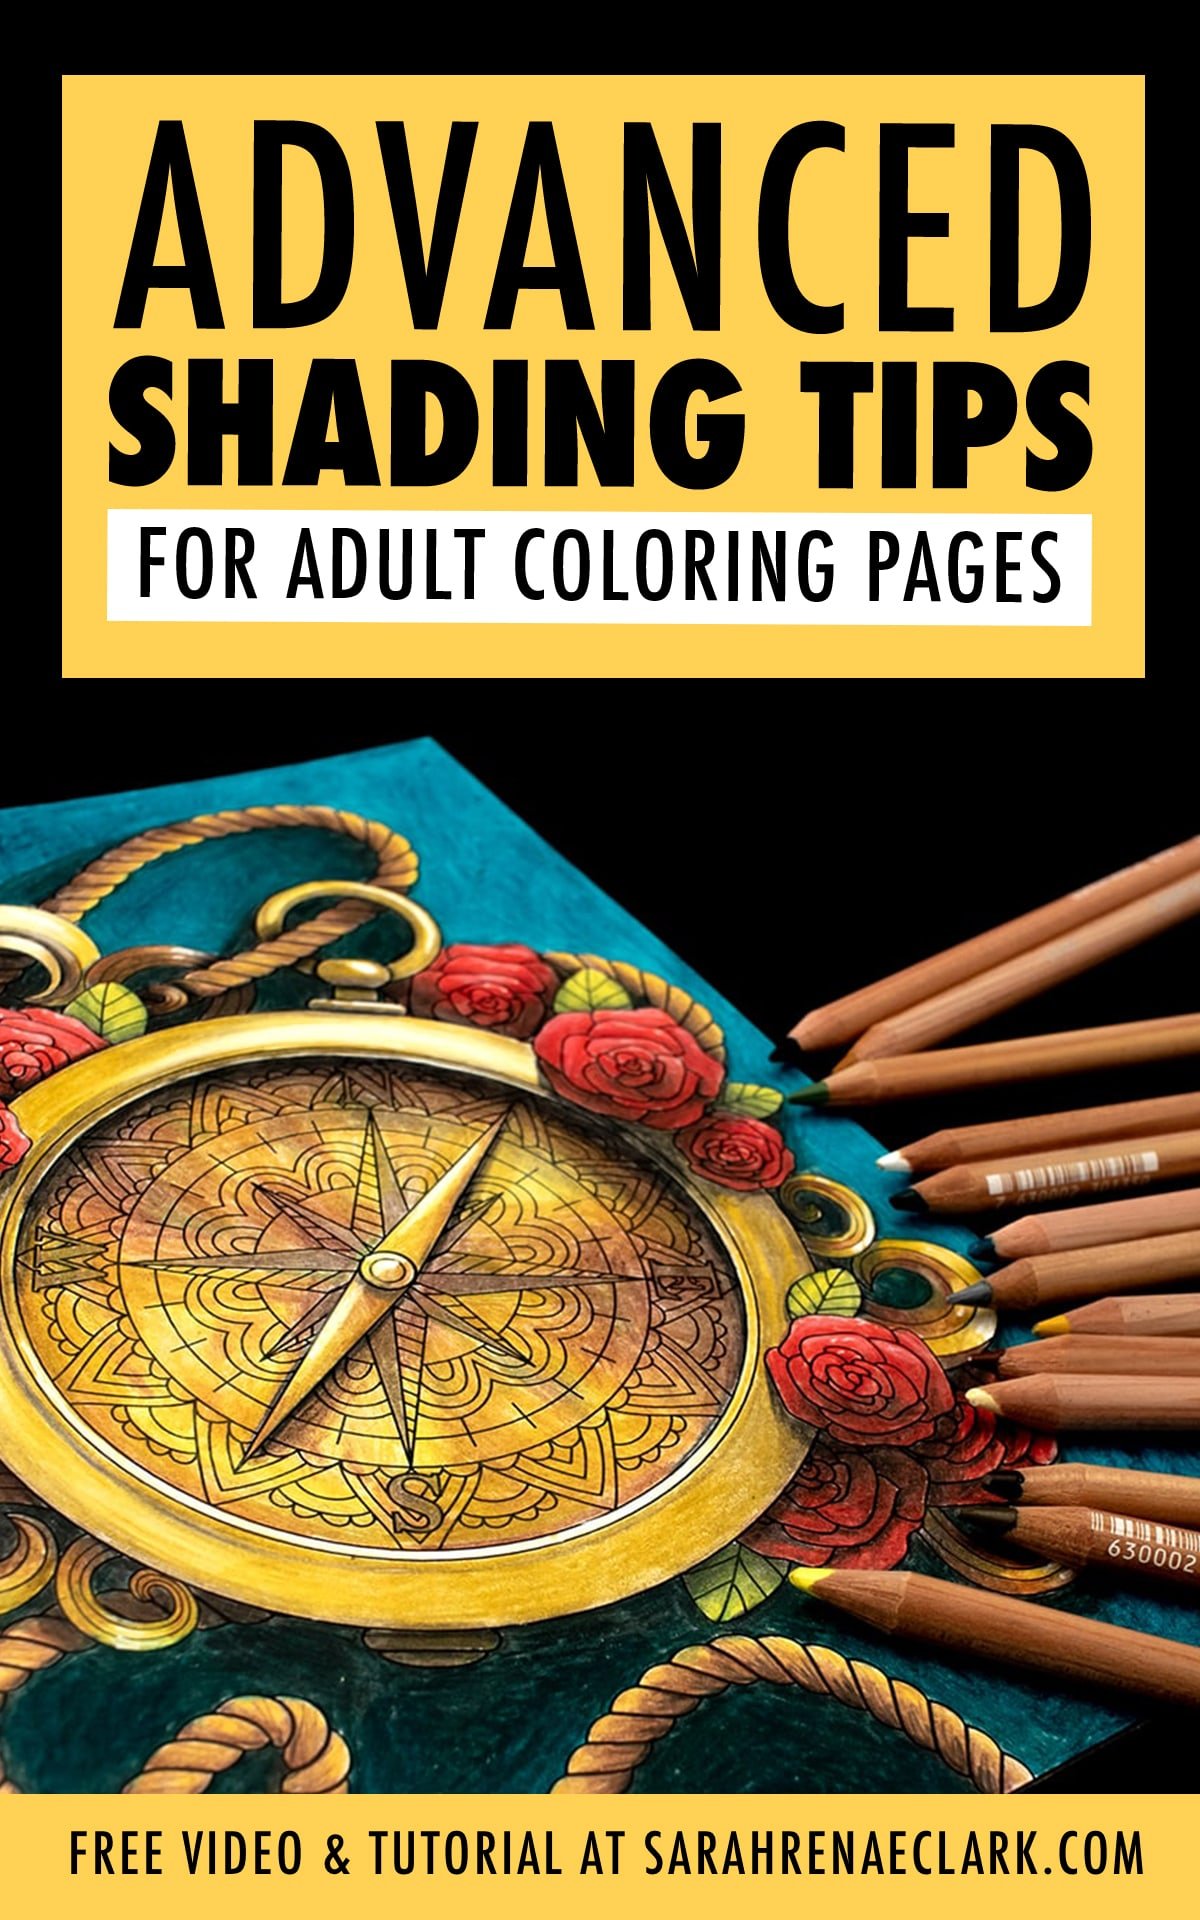 IV. Step-by-Step Guide to Mastering Advanced Coloring Techniques